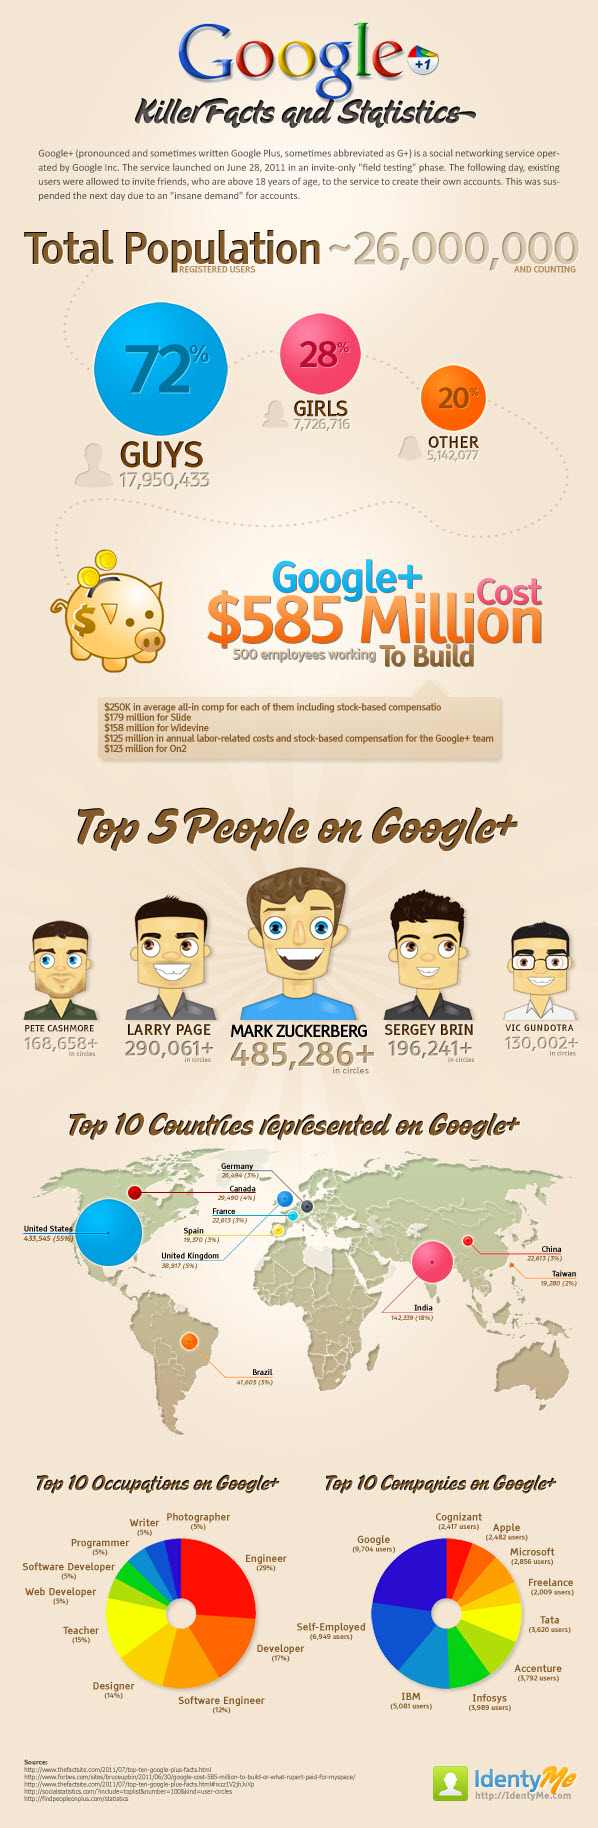 Google+ Facts and Figures